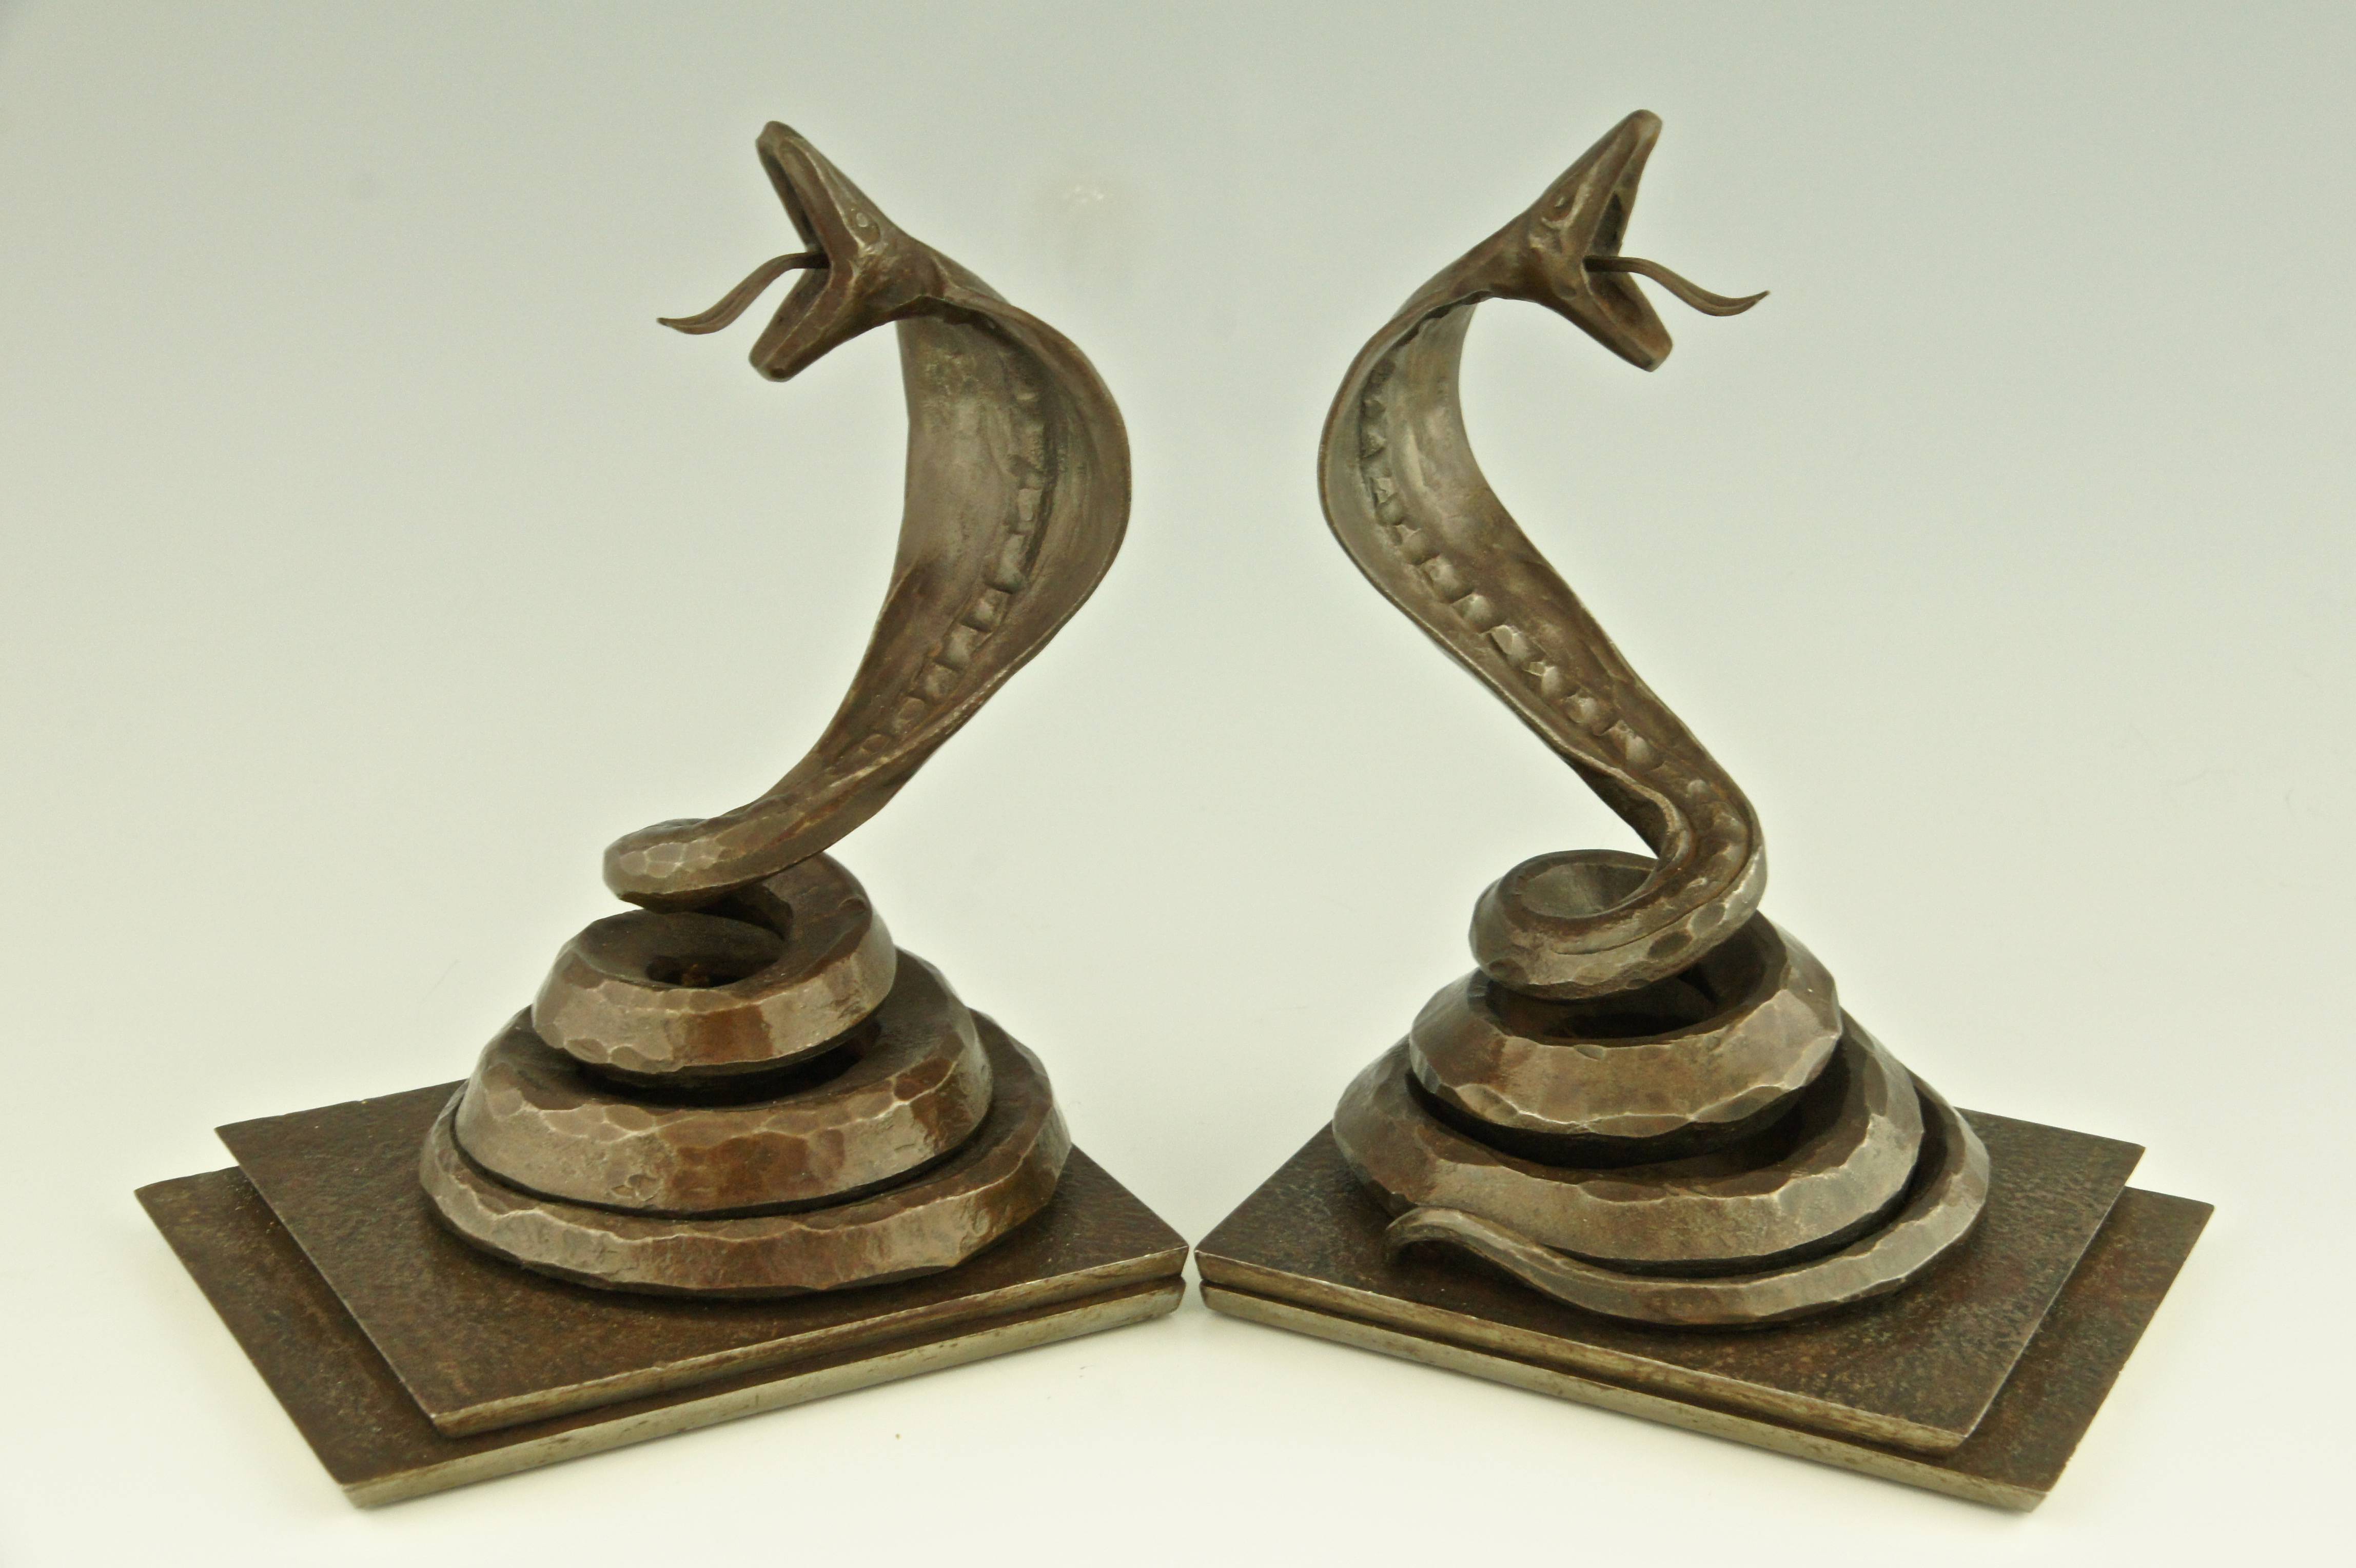 Pair of Art Deco Wrought Iron Cobra Bookends by Edgar Brandt